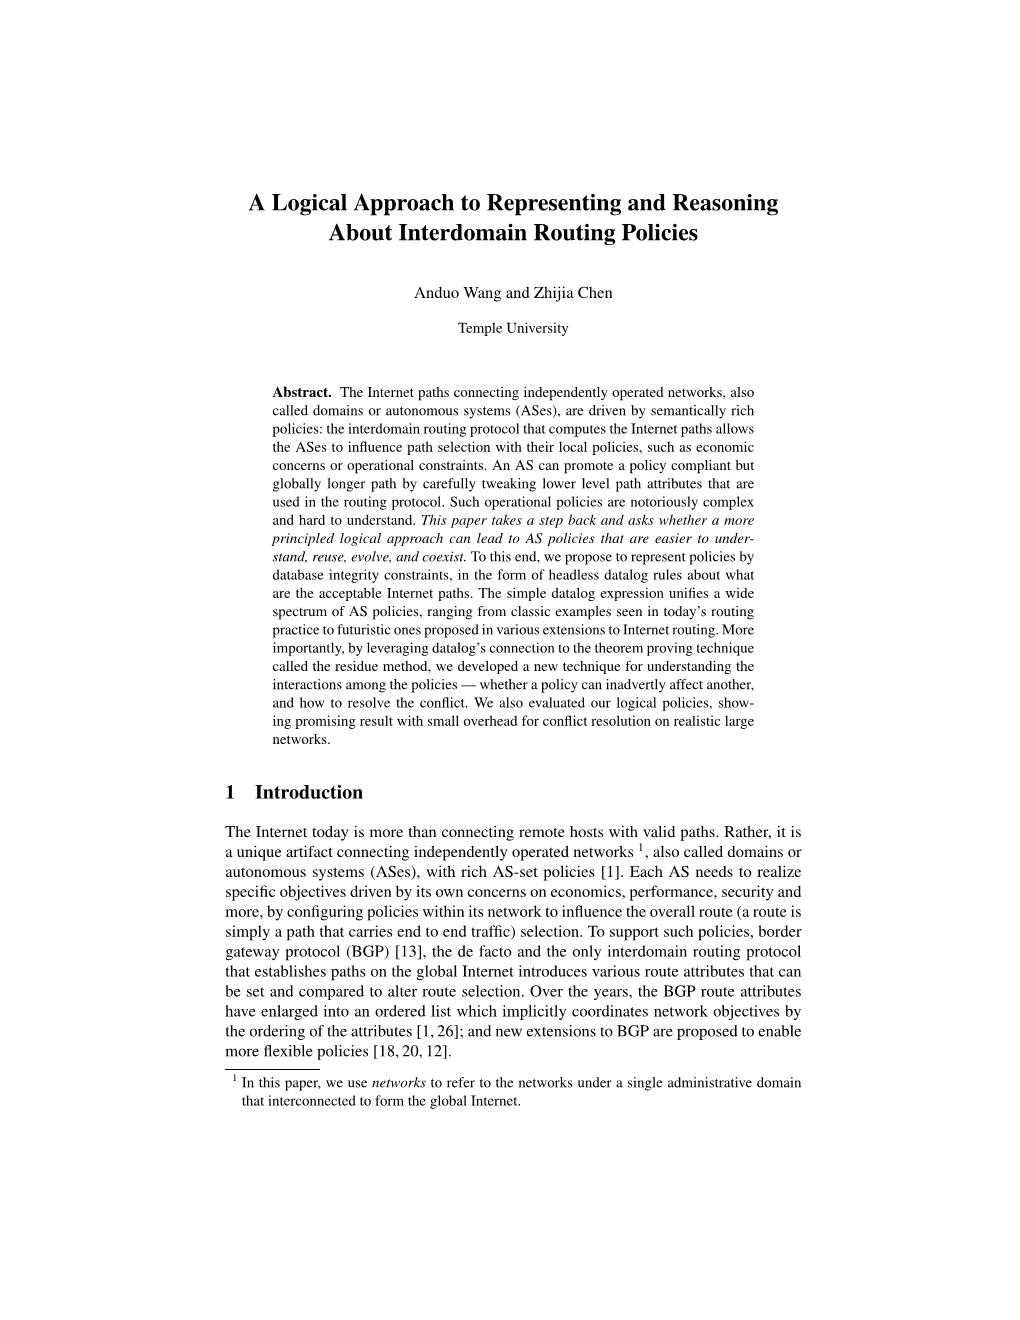 A Logical Approach to Representing and Reasoning About Interdomain Routing Policies